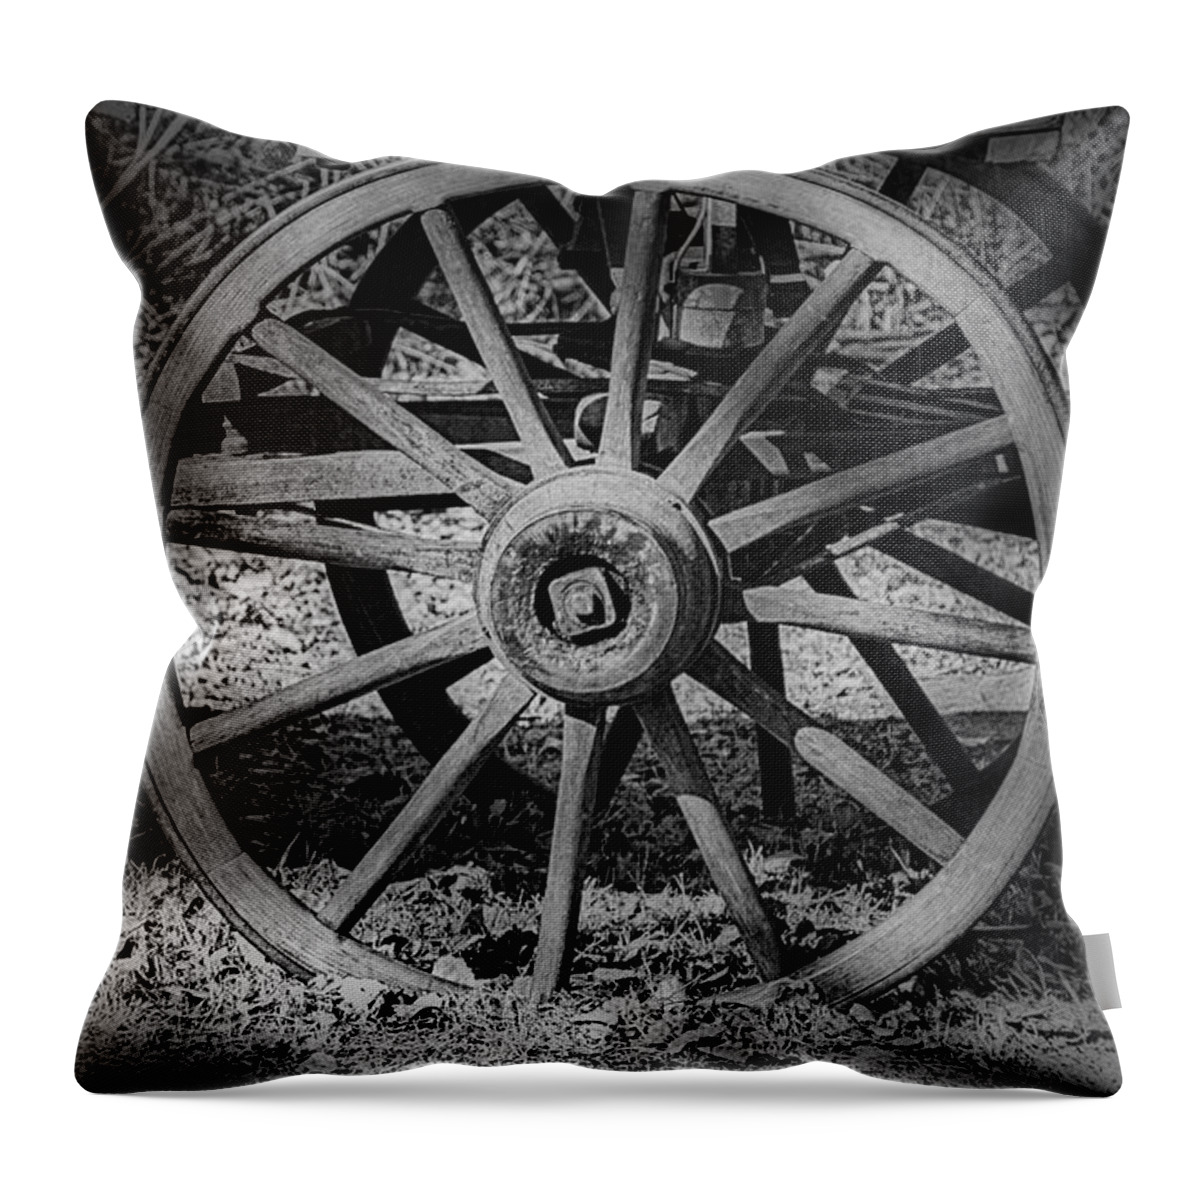 Jay Stockhaus Throw Pillow featuring the photograph Wagon Wheel by Jay Stockhaus